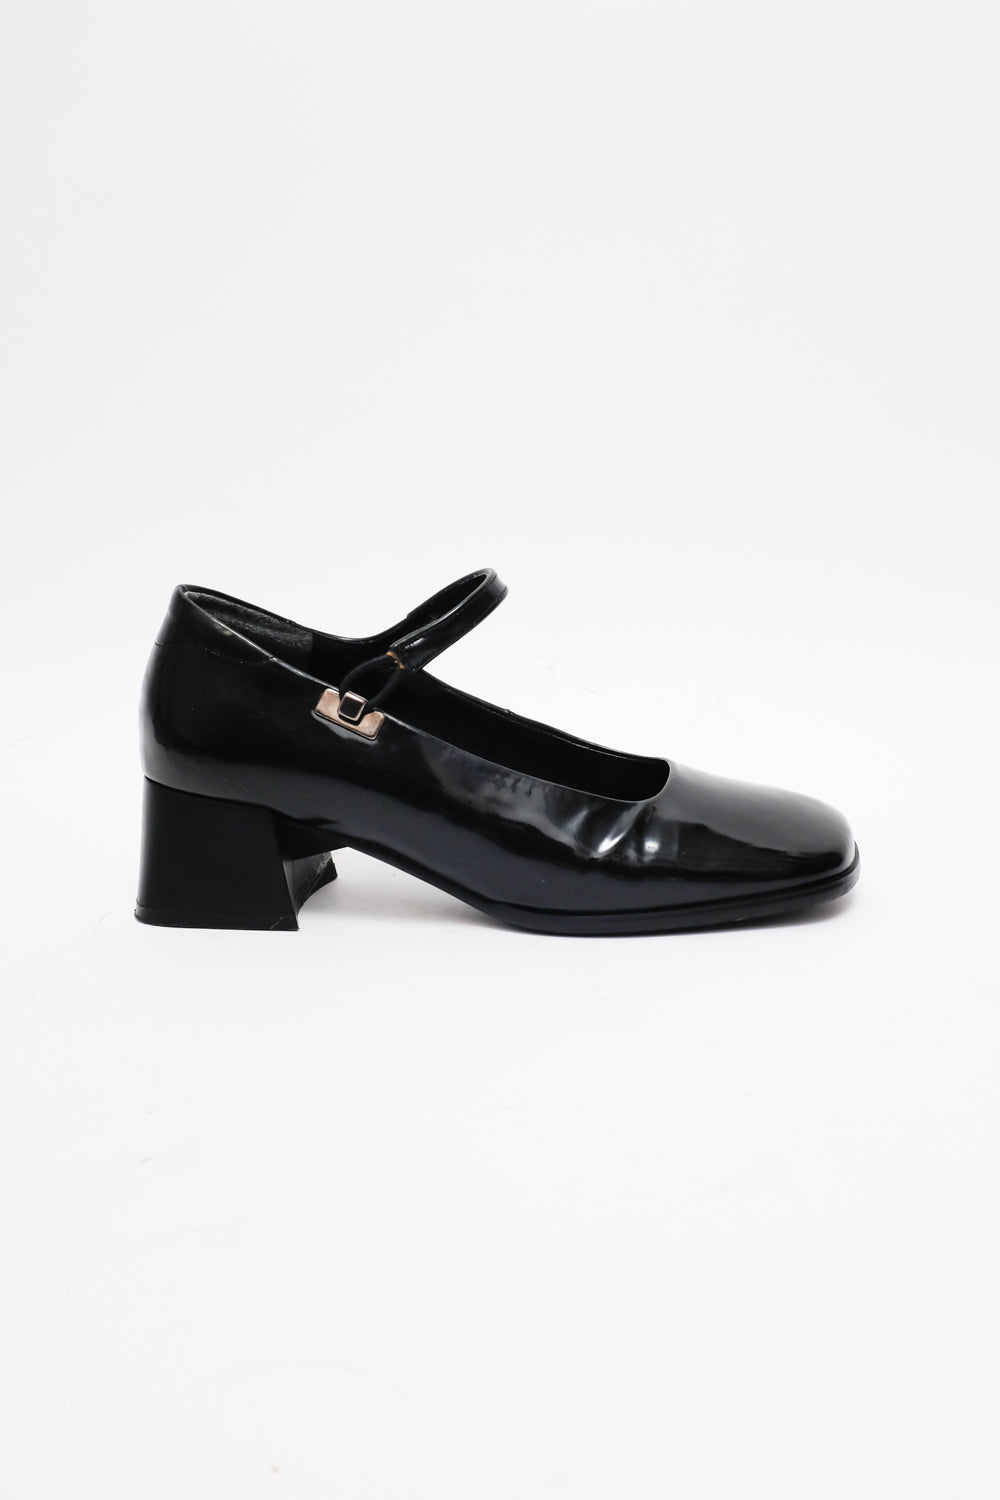 MARY JANE BLACK PATENT LEATHER SHOES 37